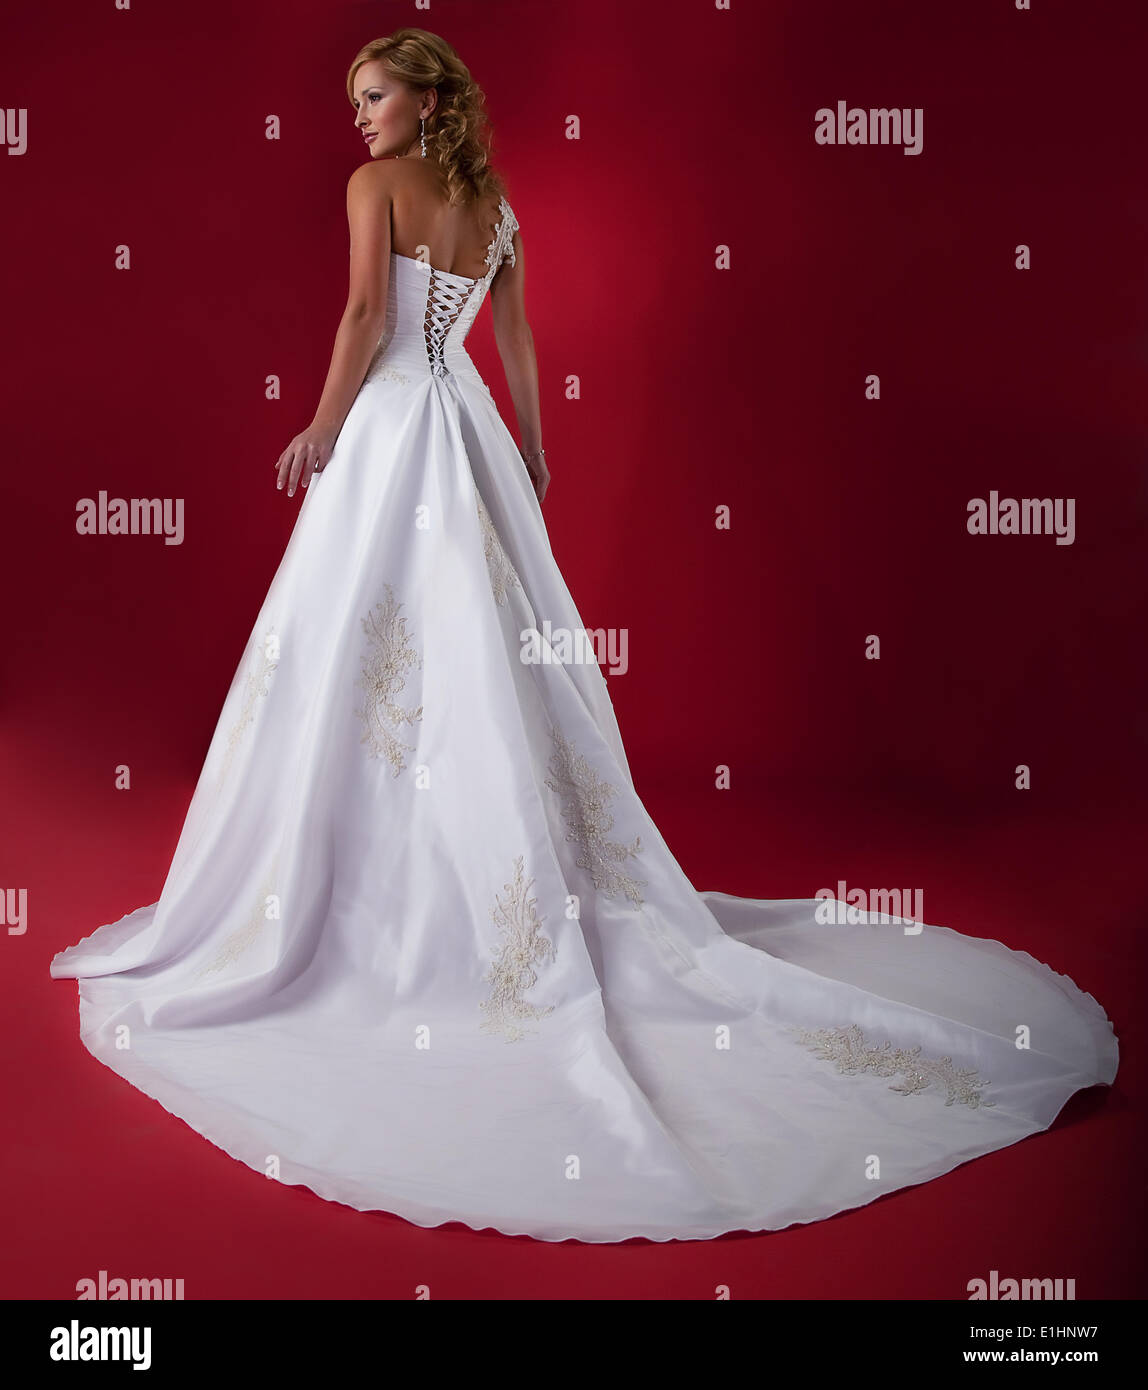 Fashionable blonde young bride in long white wedding dress over red background. Studio shot Stock Photo